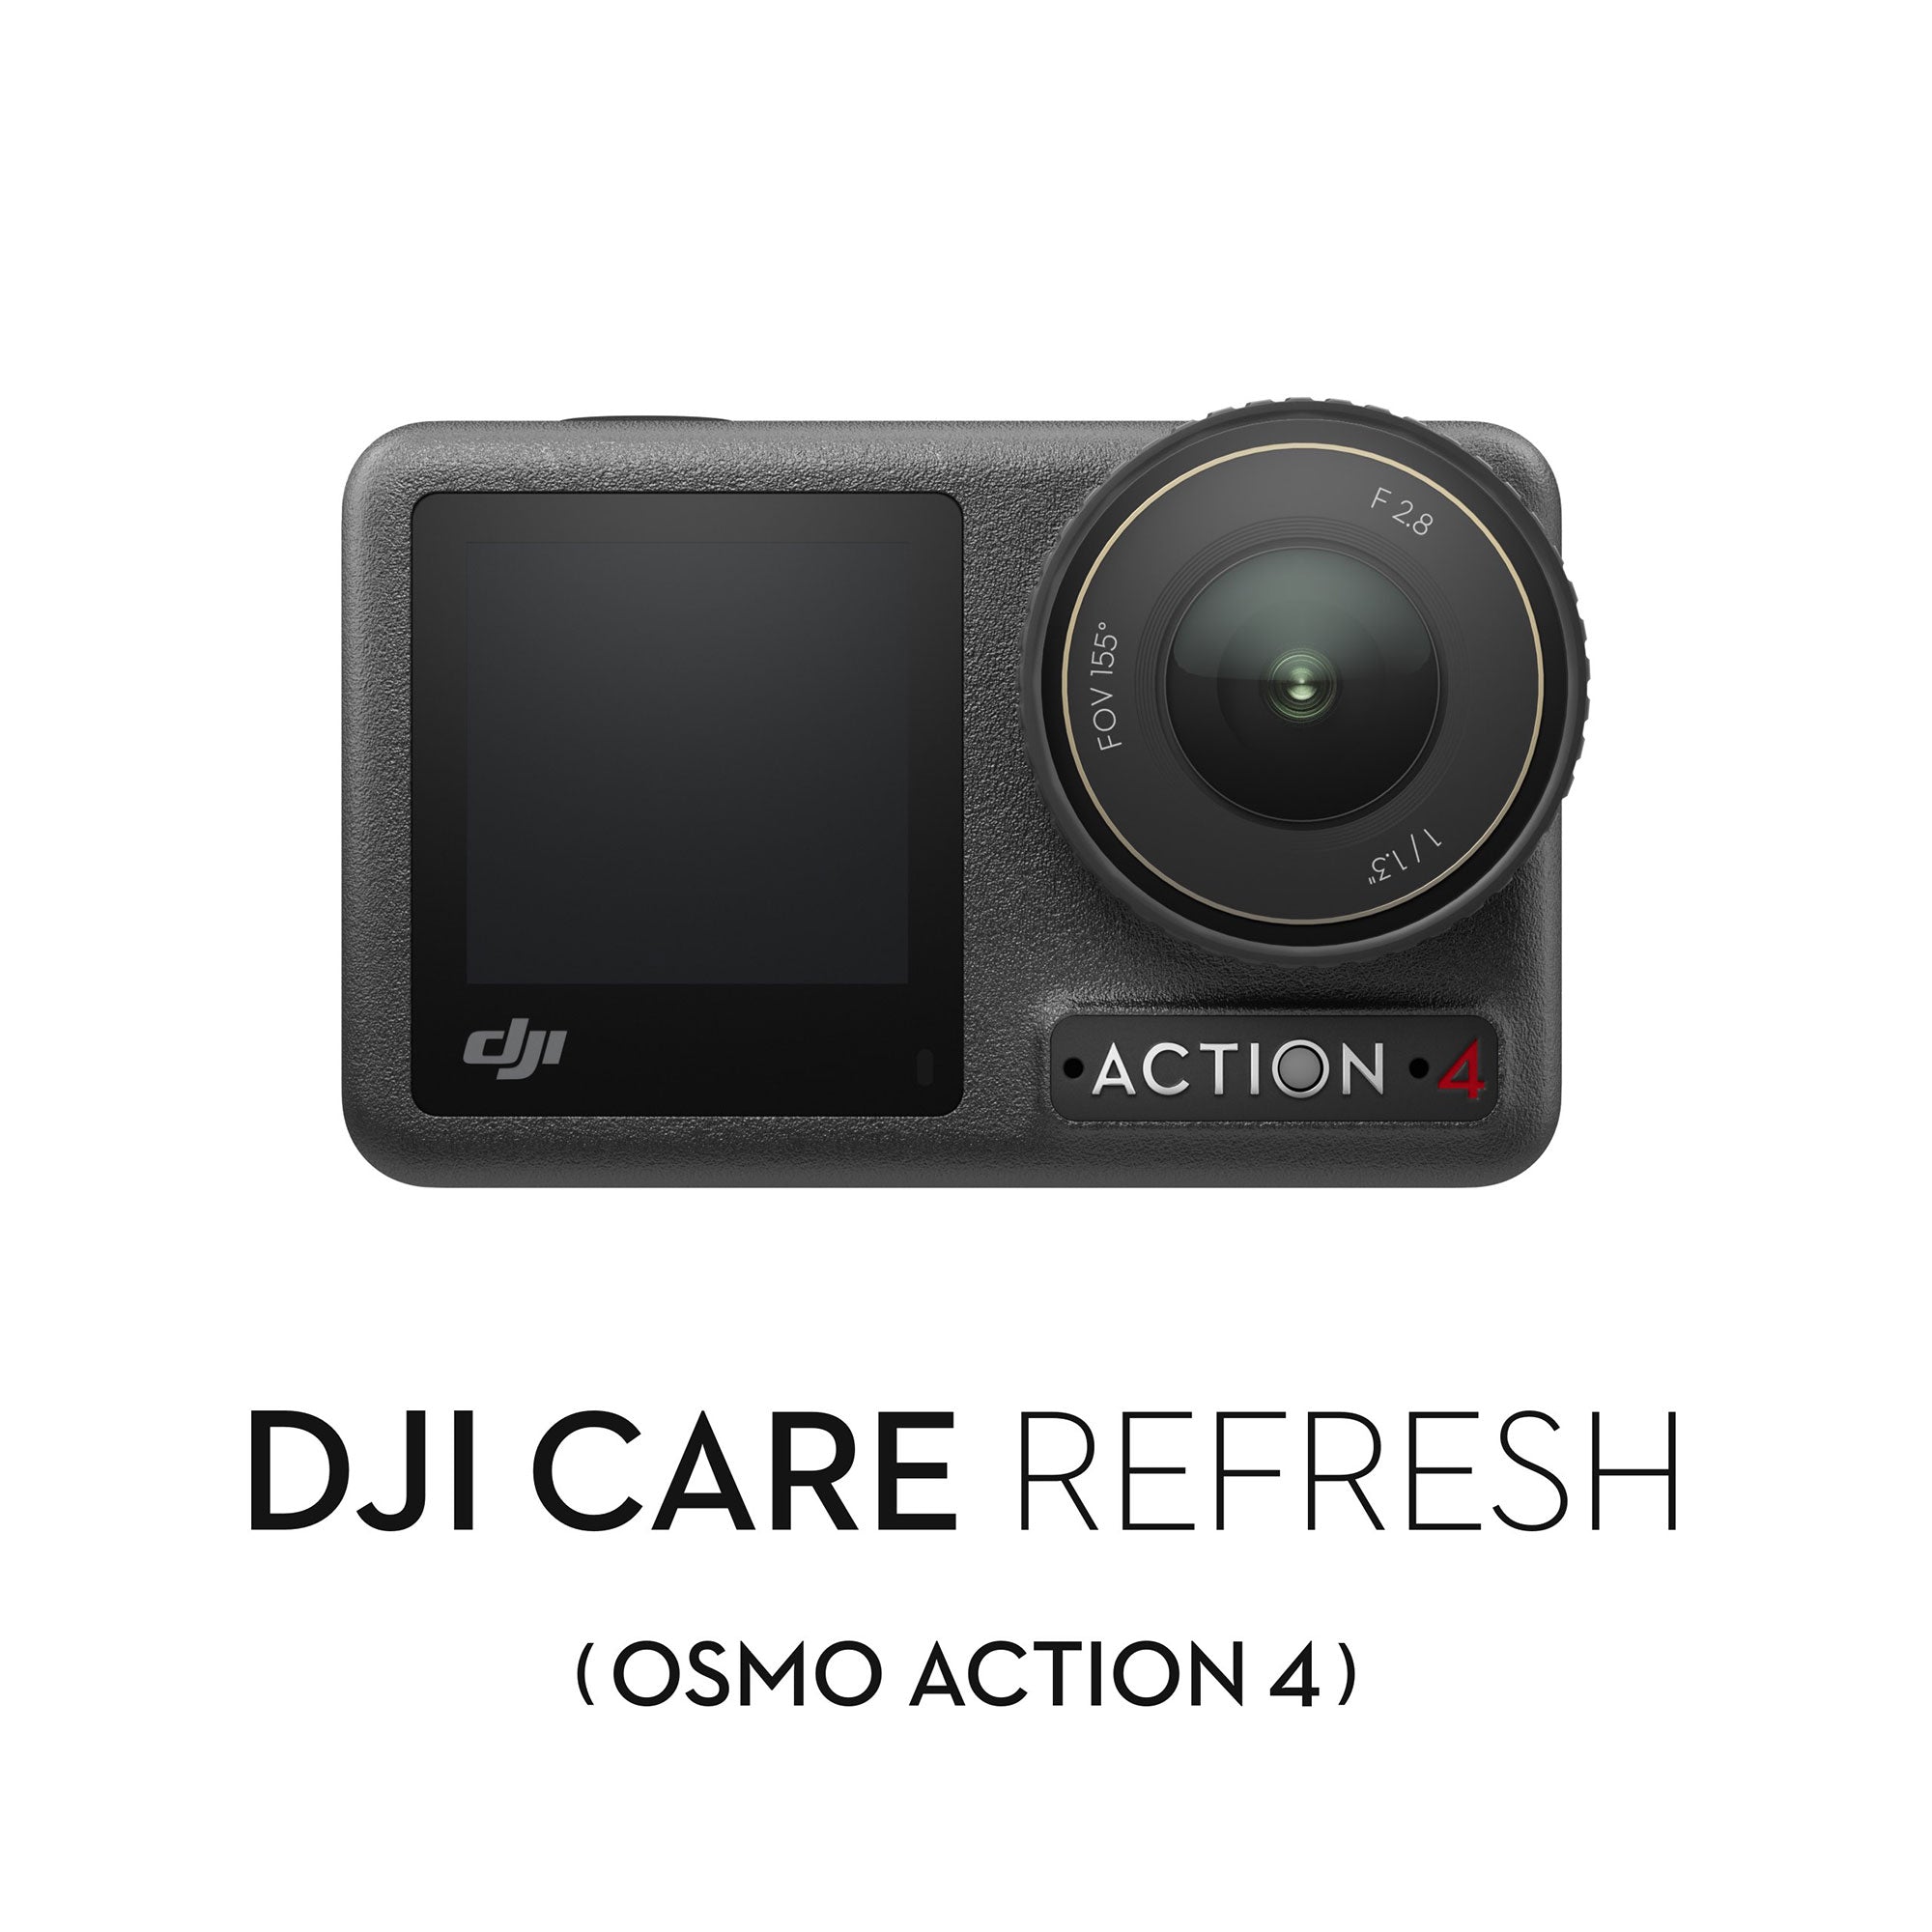 DJI Care Refresh1年版 (Osmo Action 4)カード - 業務用撮影・映像